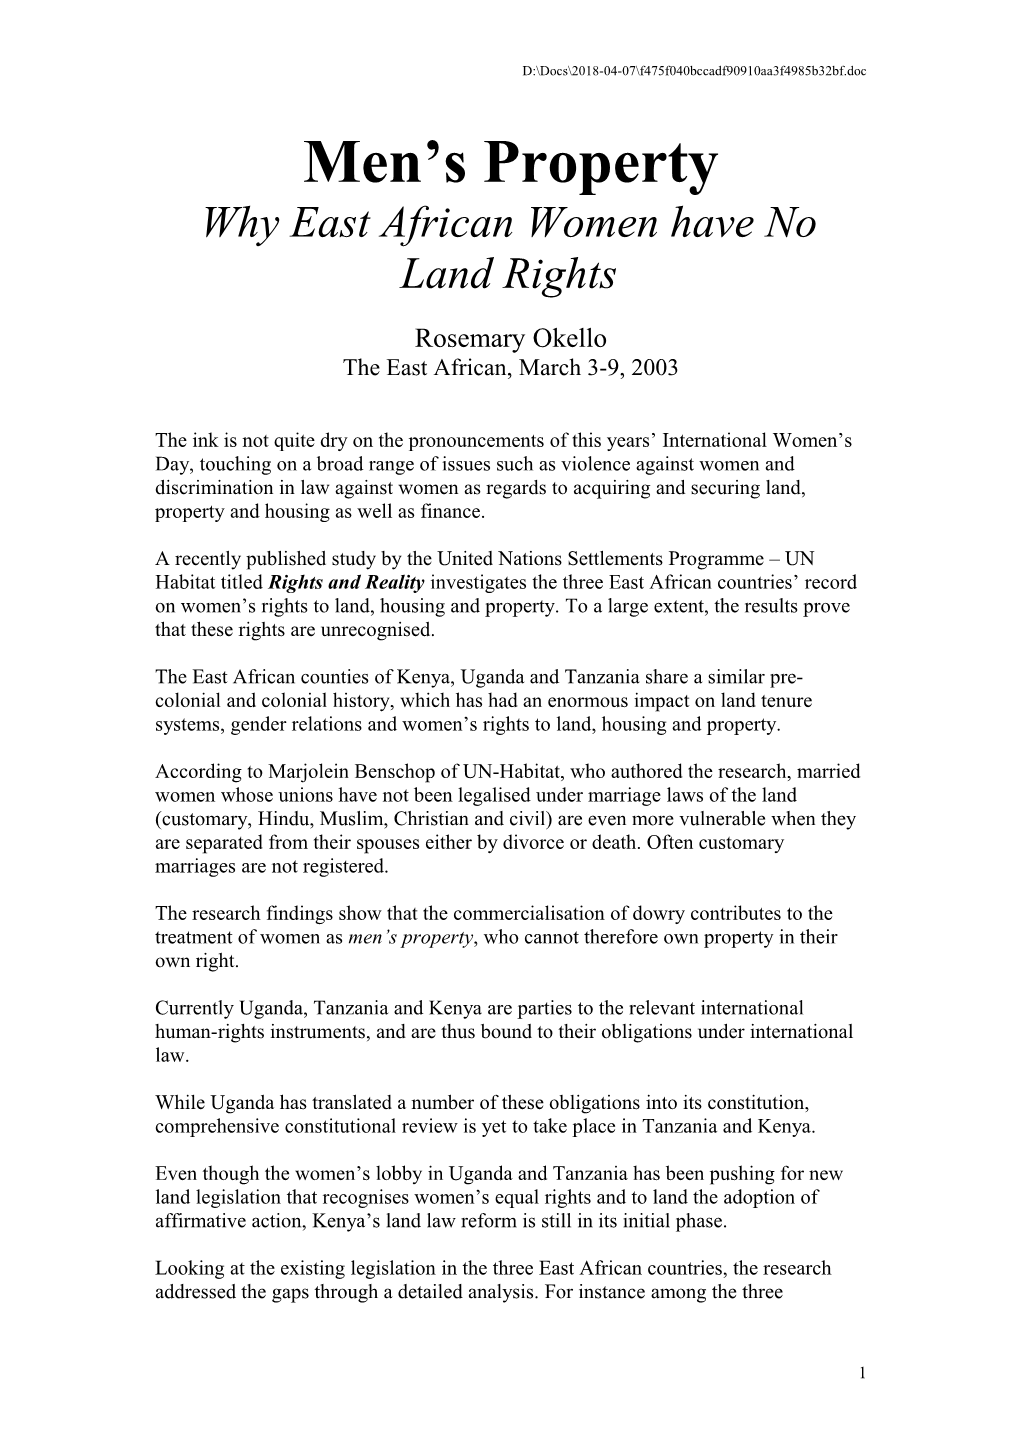 Why East African Women Have No Land Rights